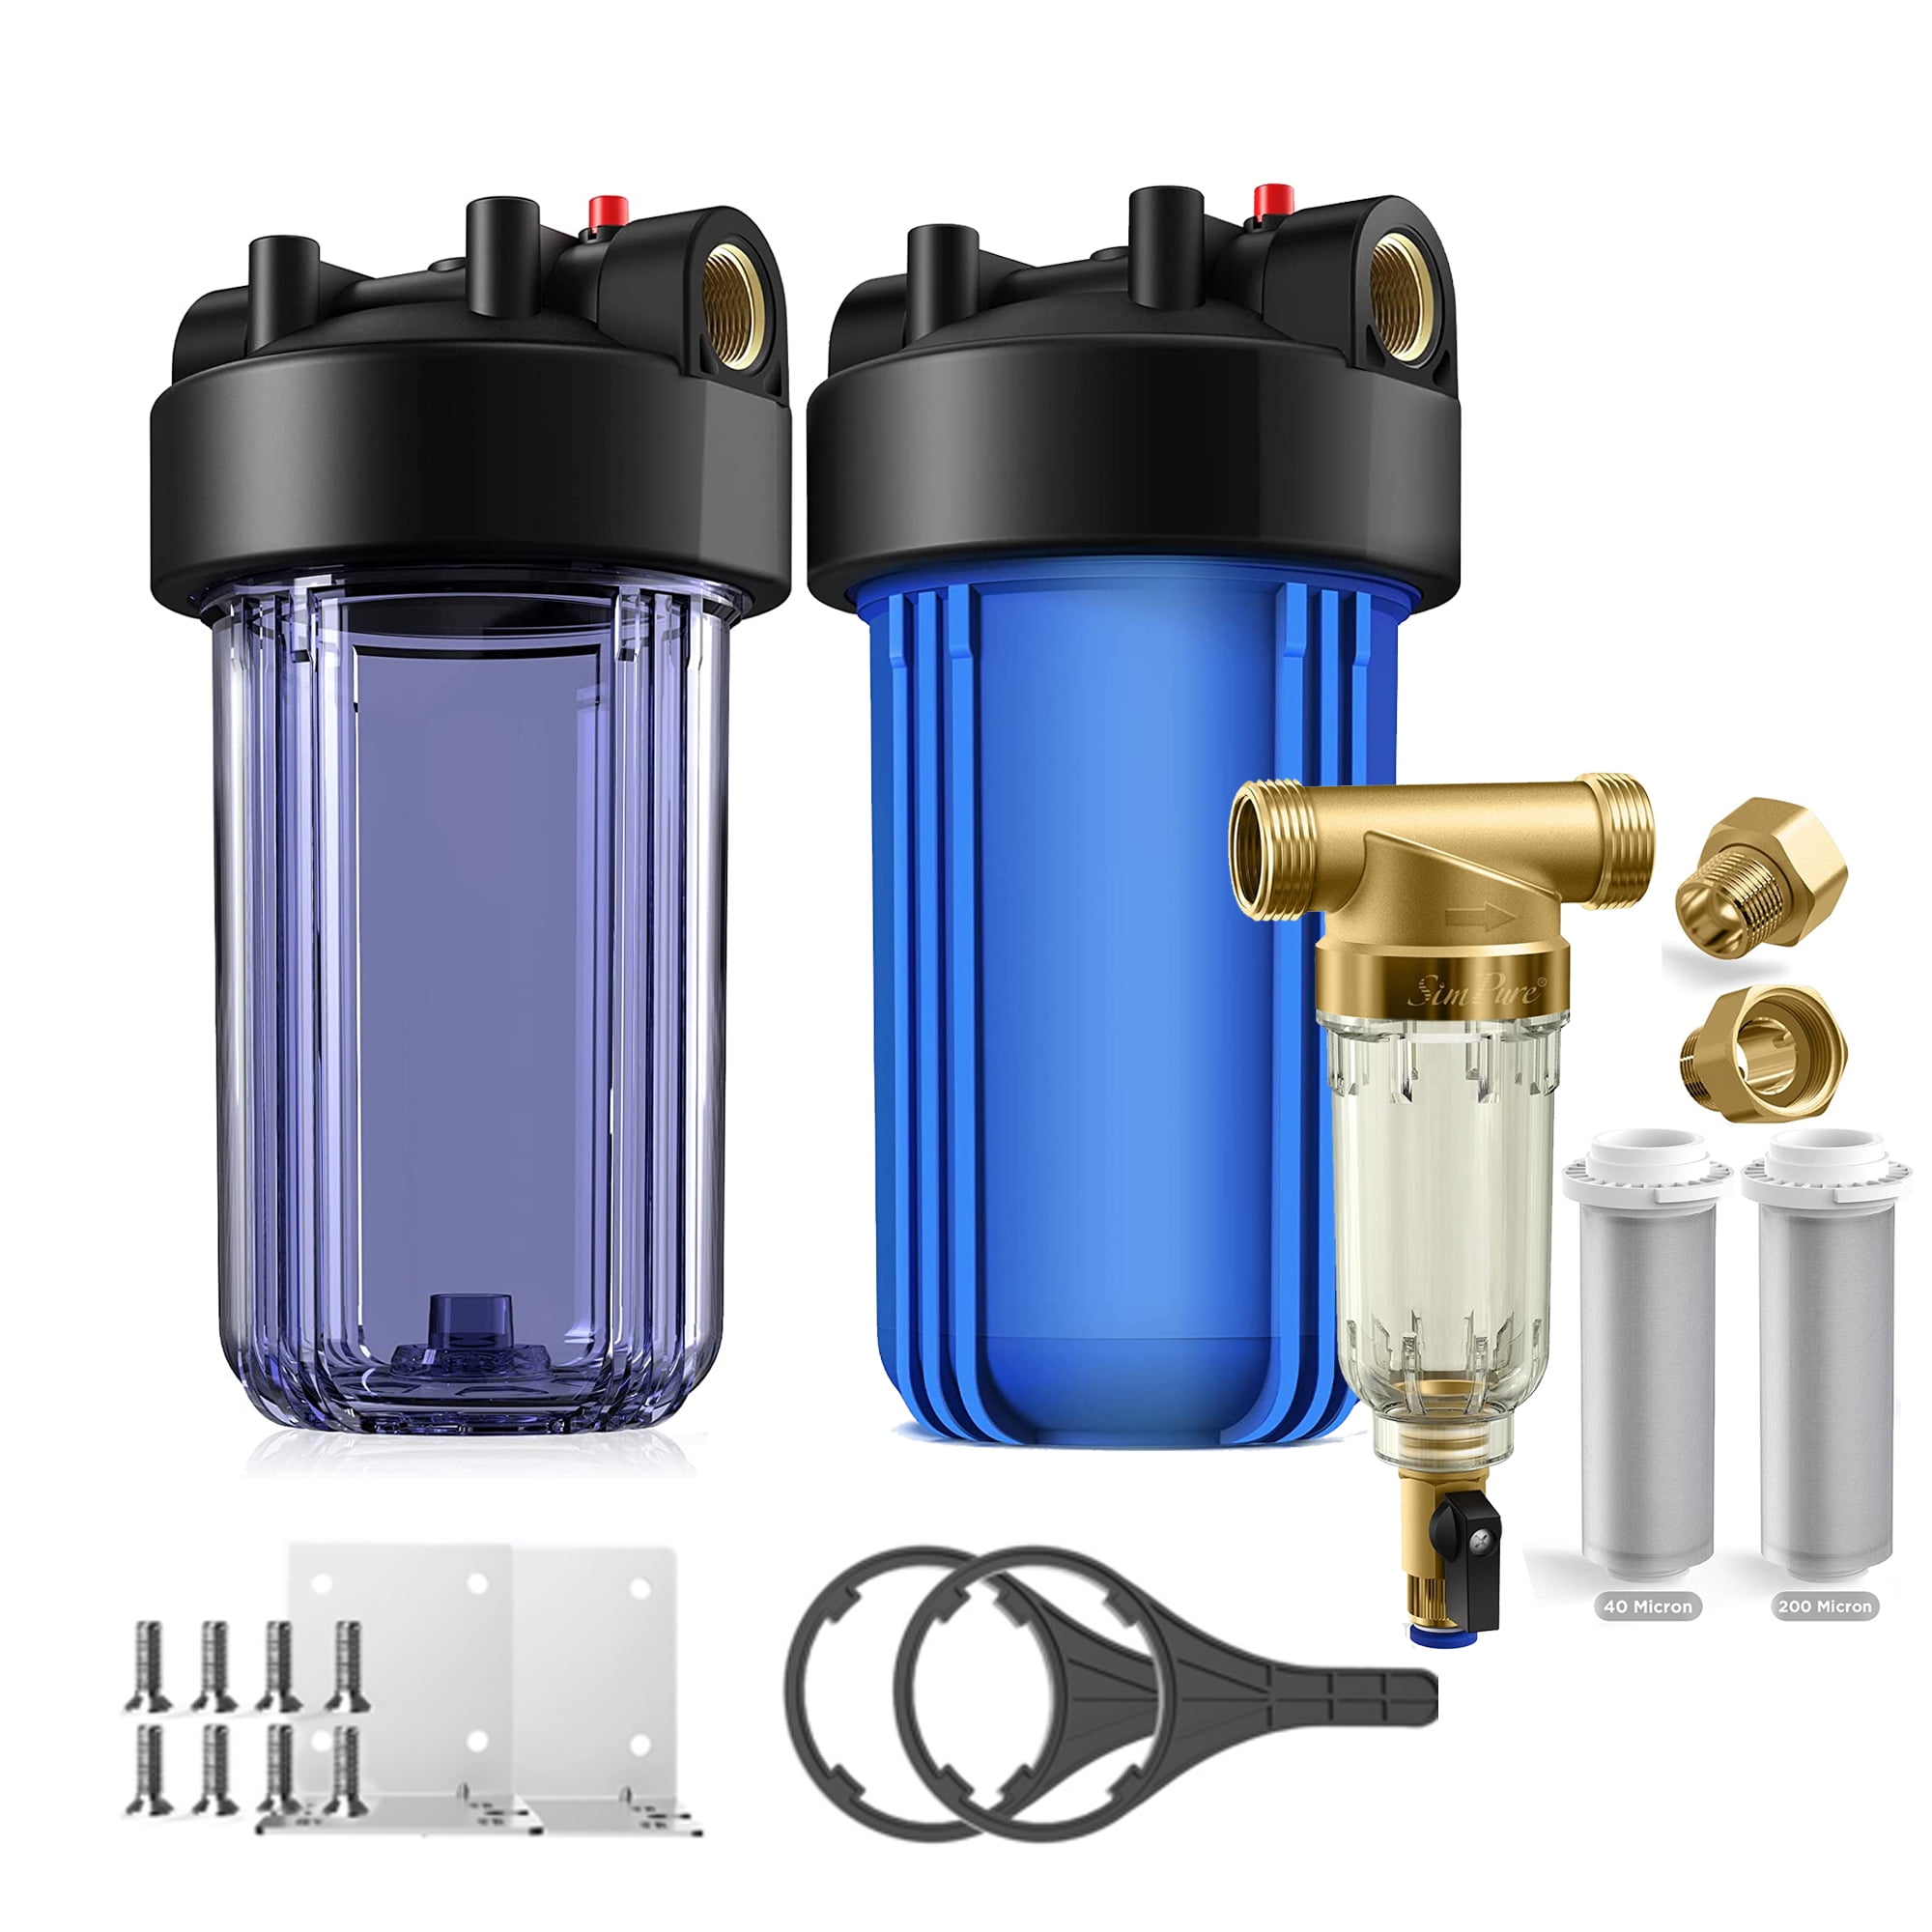 How Many Microns Should Your Water Filter Be? - Brother Filtration